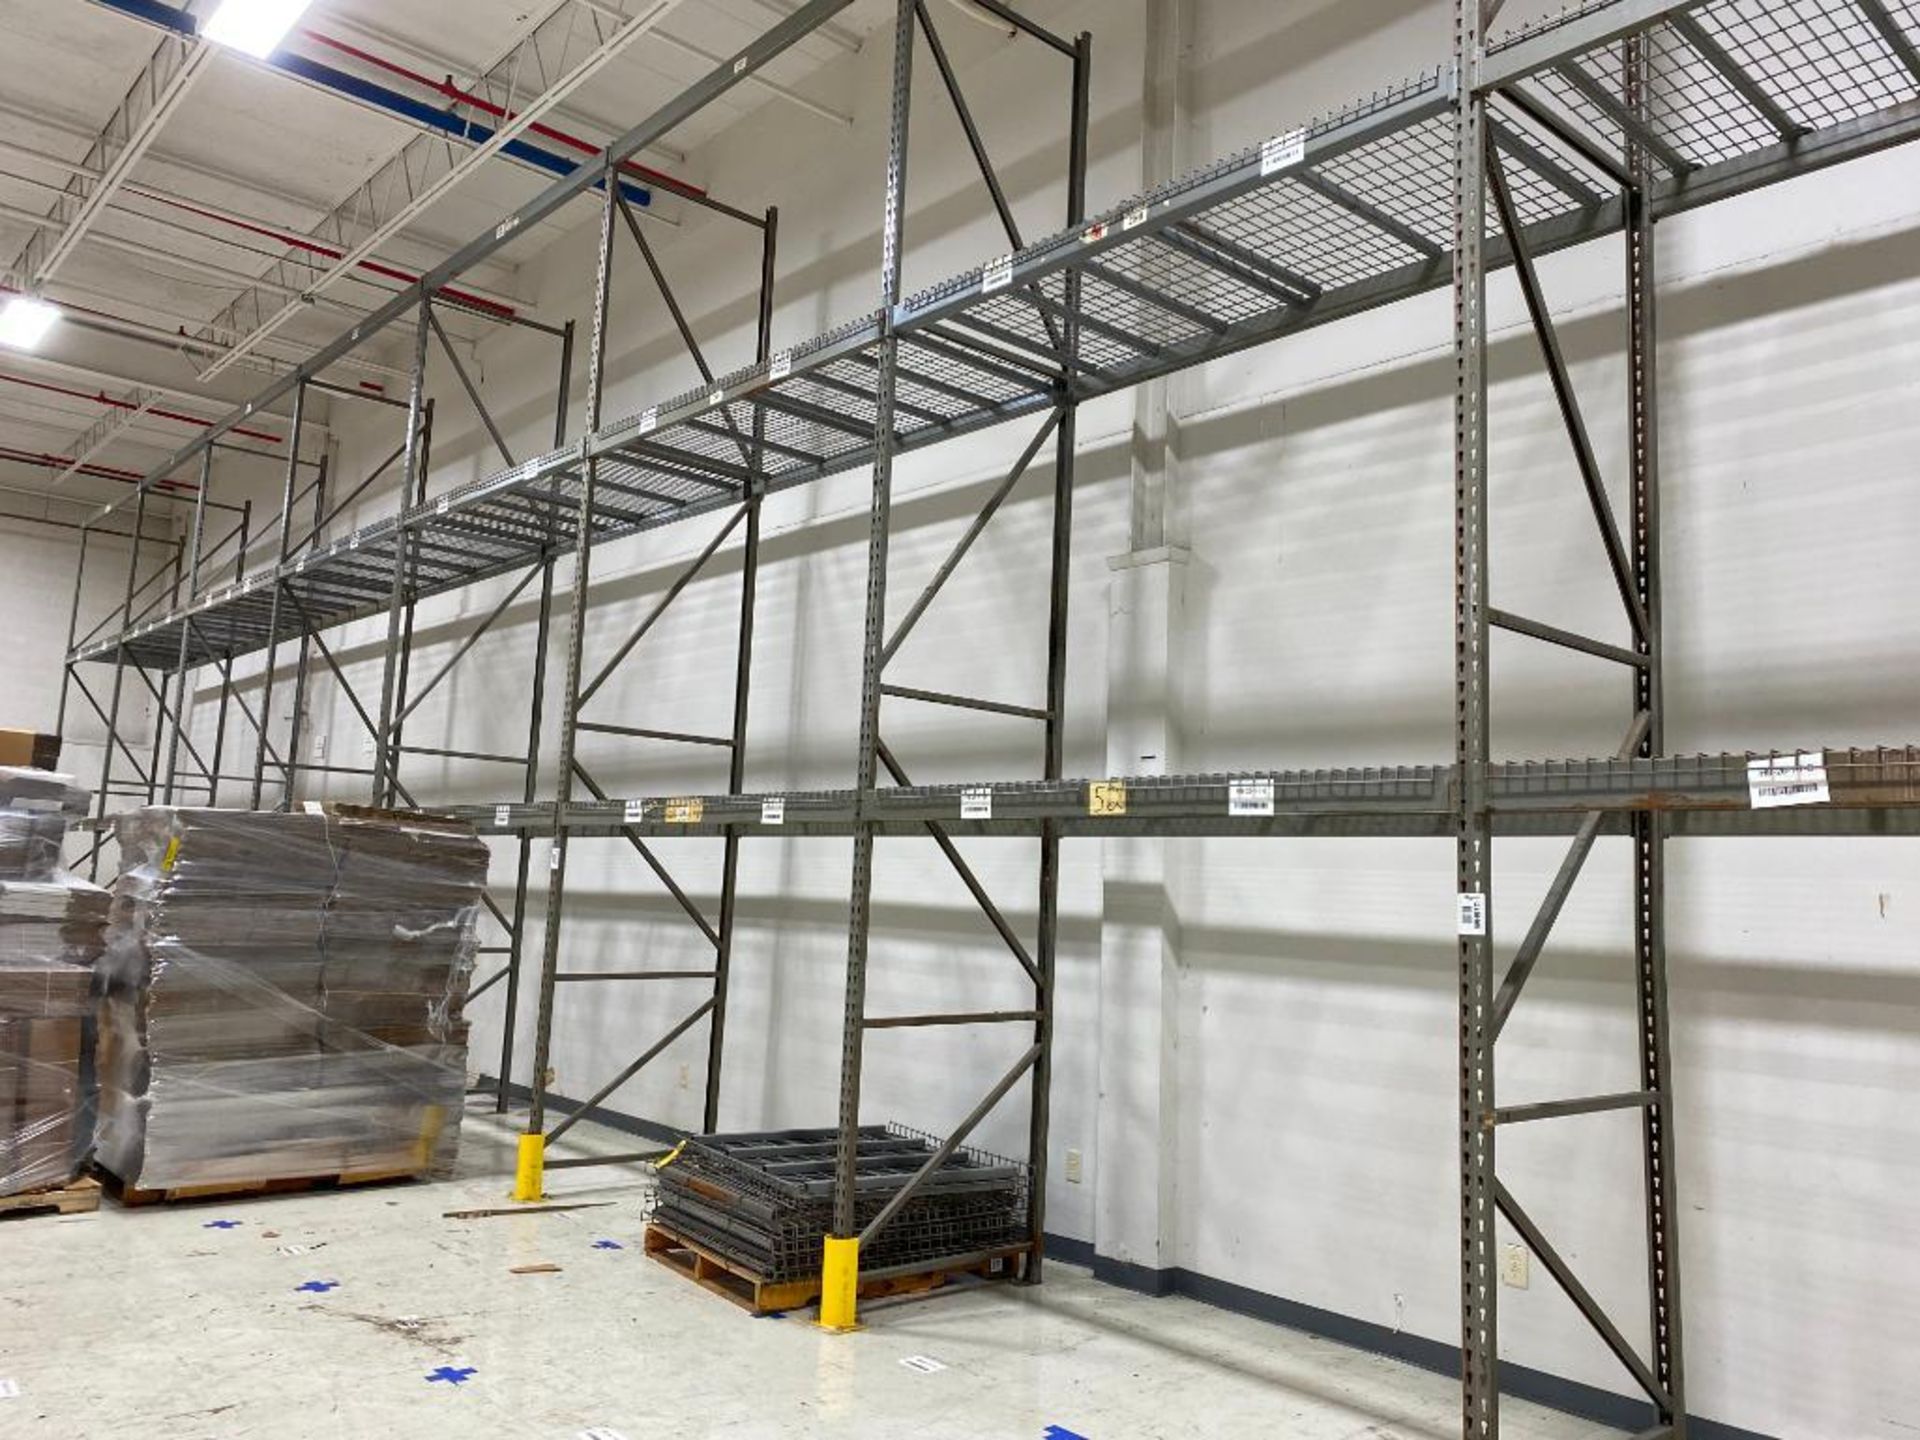 (9x) Sections of Pallet Racking, (11) 18' x 42-1/2" Uprights, (53) 96" x 4" Beams, & (56) Wire Decks